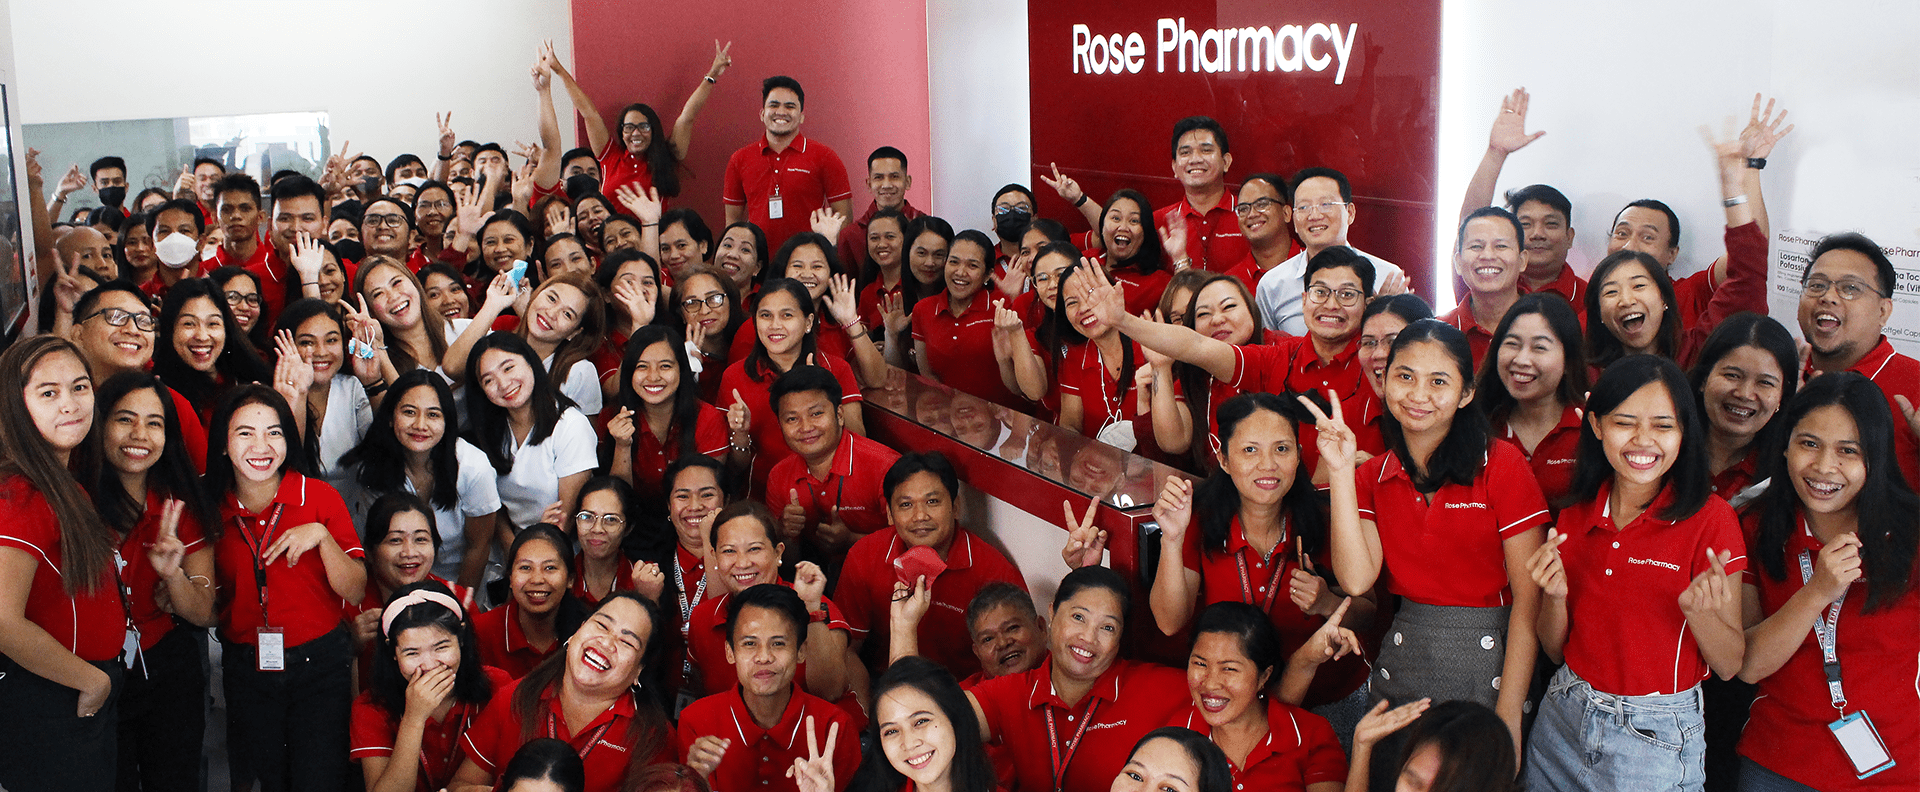 Rose Pharmacy About us